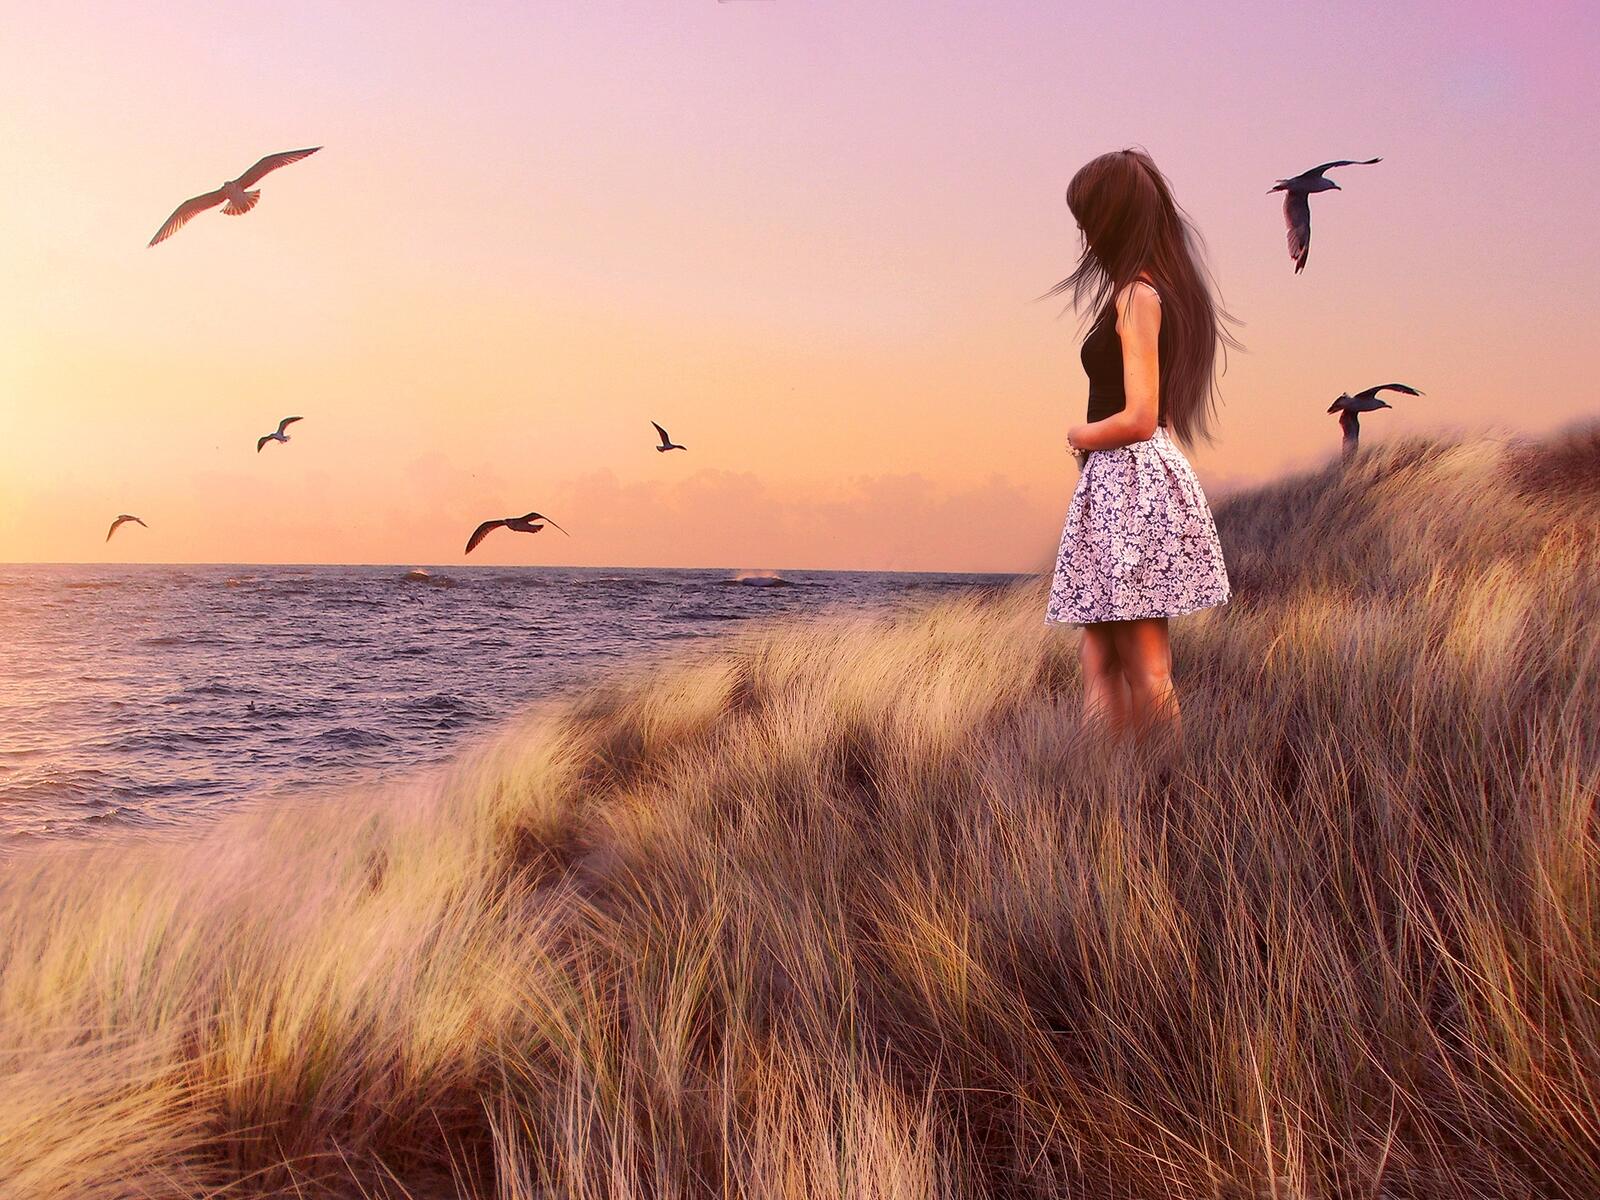 Free photo A girl in a dress standing near the shore where the seagulls fly